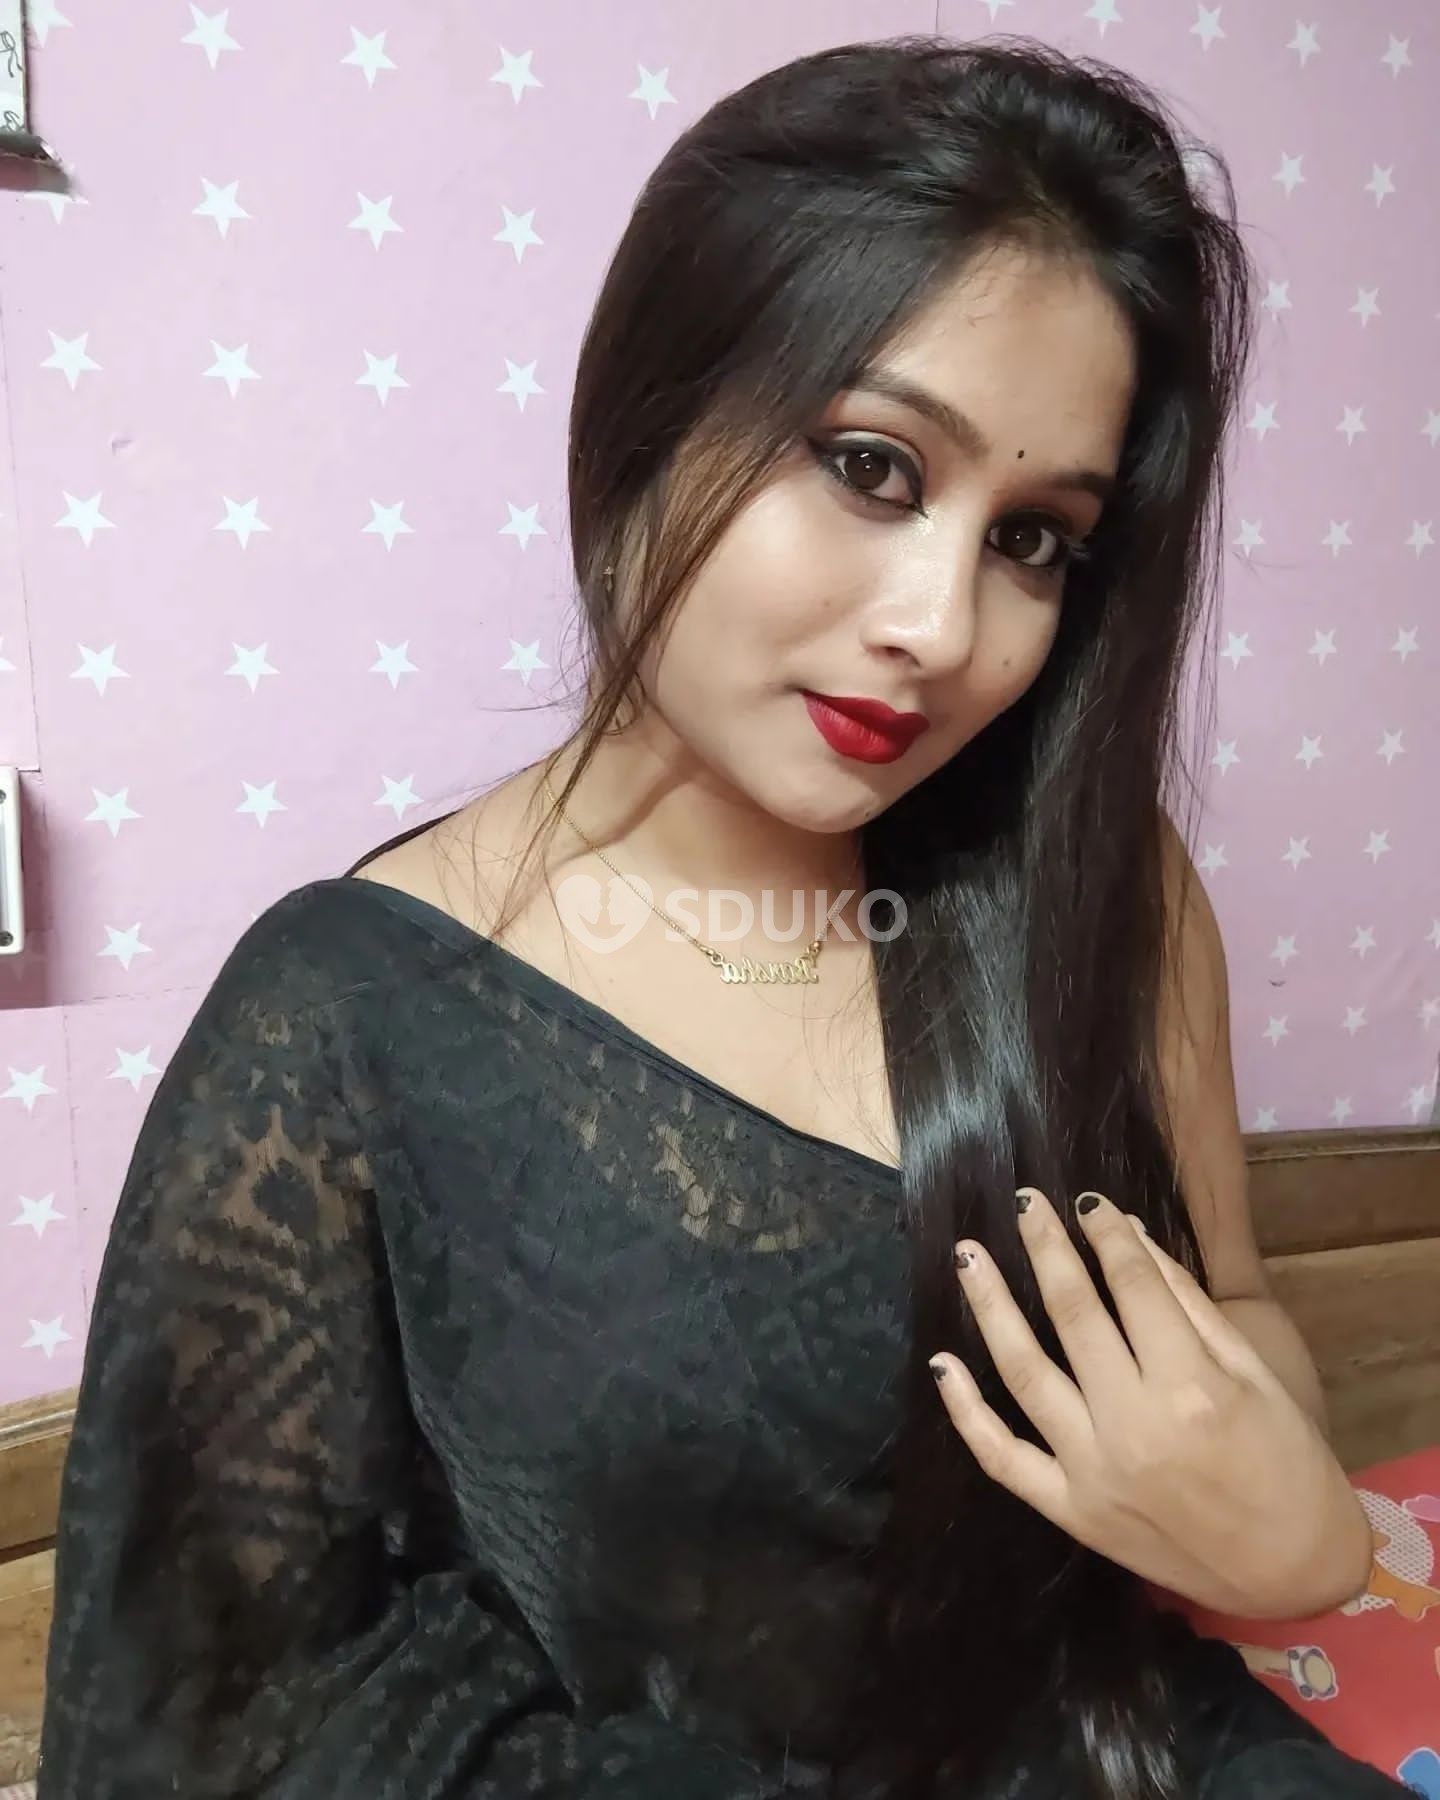 MALAD HIGH PROFILE HOT SEXY VIP INDEPENDENT COLLEGE GIRLS HOUSEWIFE ANYTIME CALL ME  24/7 AVAILABLE